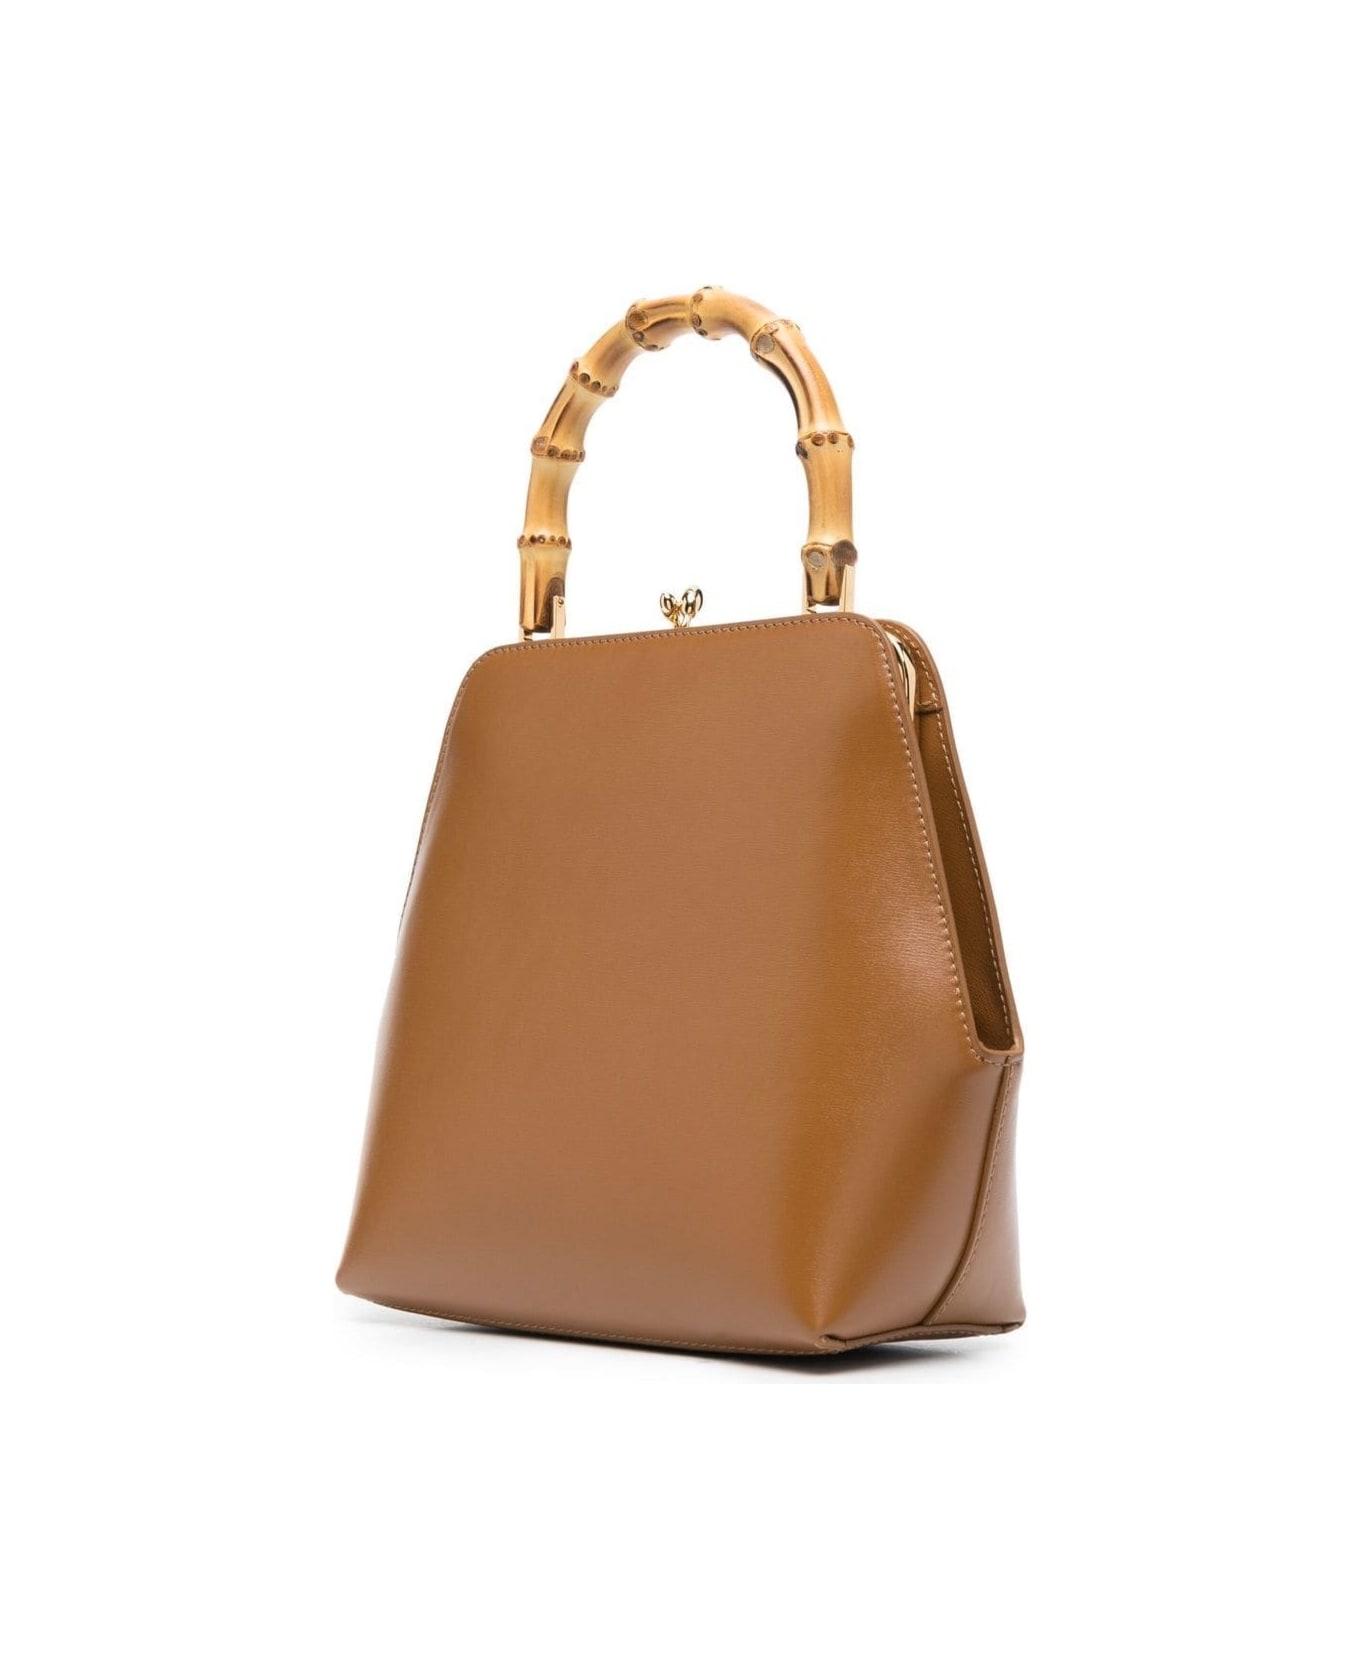 Jil Sander Brown Goji Square Handbag With Bamboo Handle In Leather Woman - Cammello